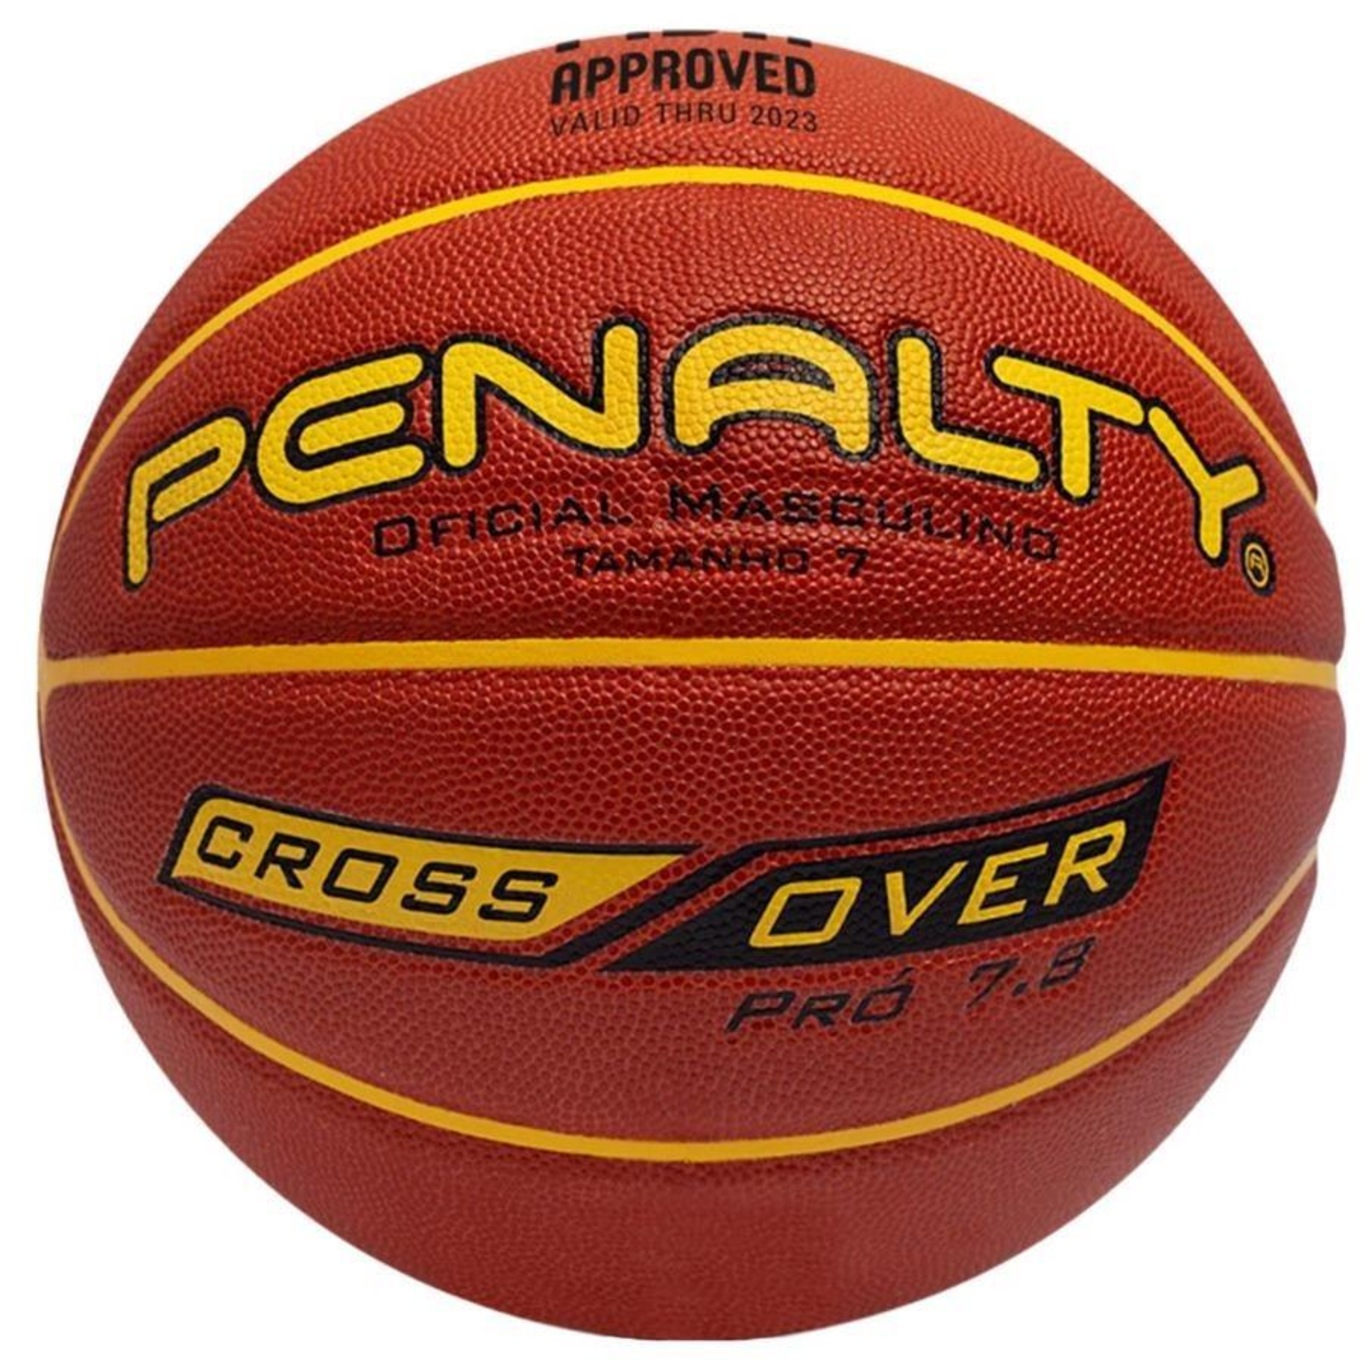 BOLA BASQUETE PENALTY 7.8 CROSSOVER